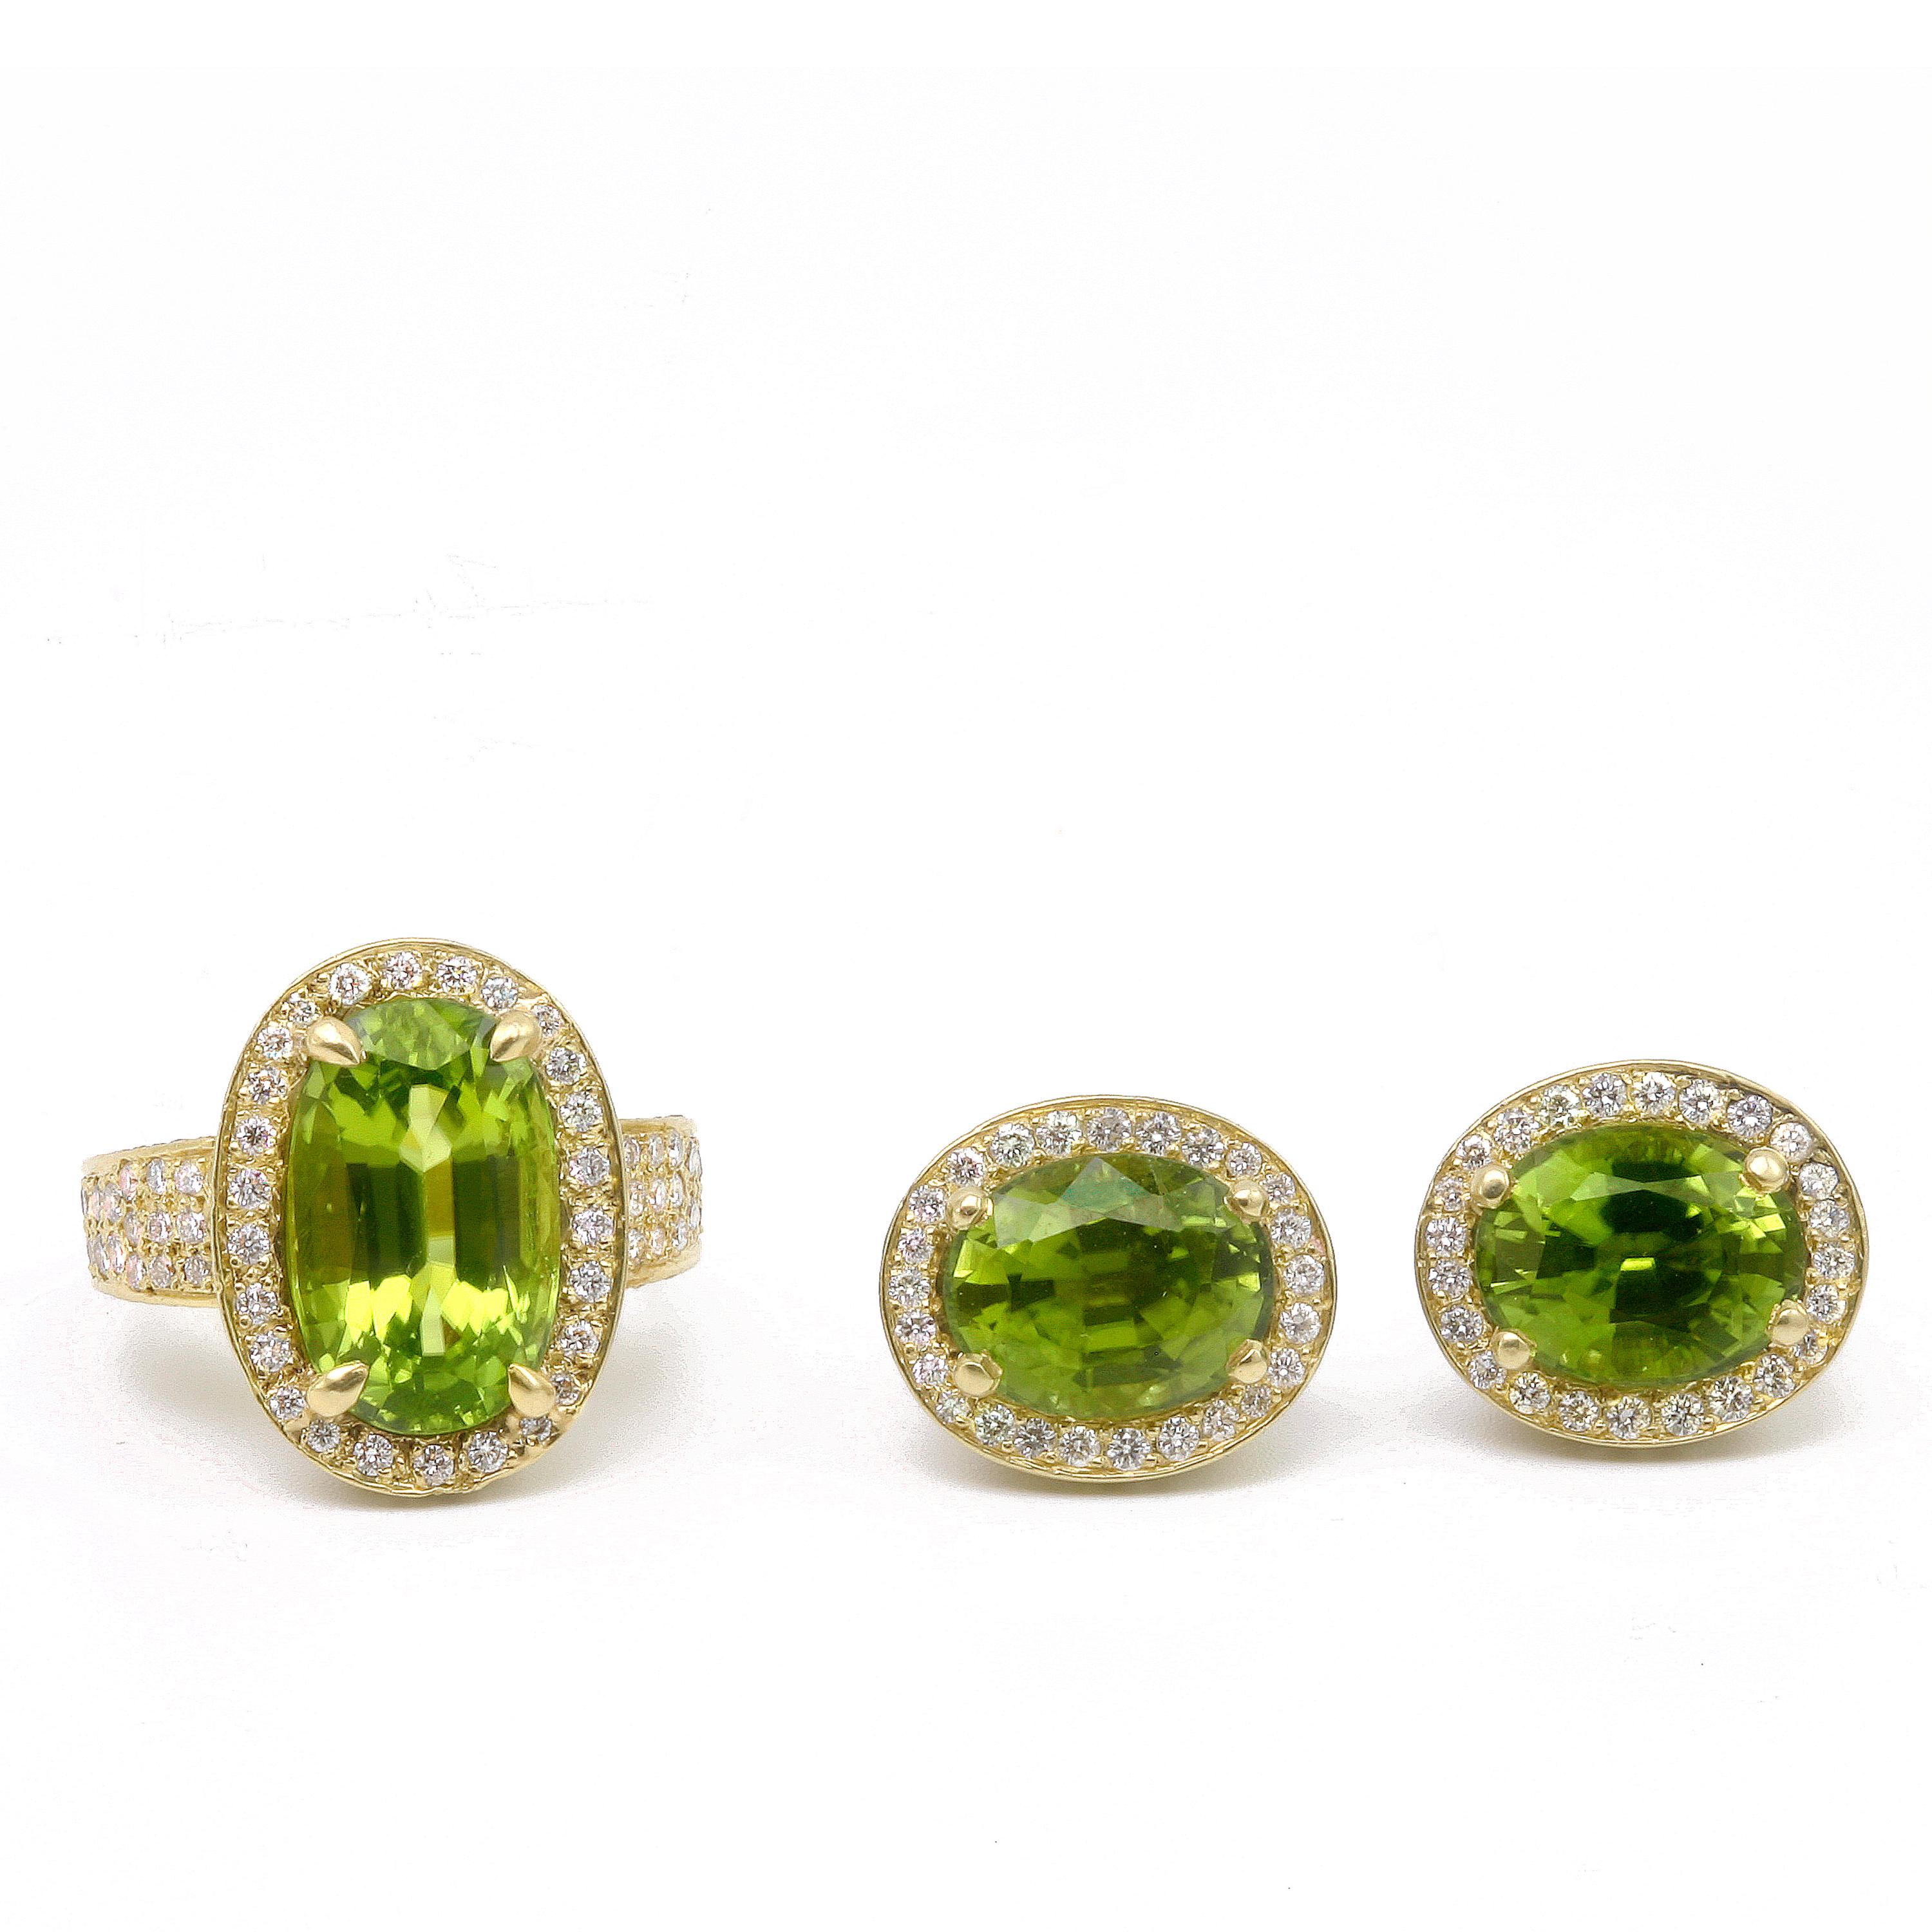 Diana Kim England Burmese Peridot Ring with Micro Pave Diamonds Set in 18k Gold For Sale 1